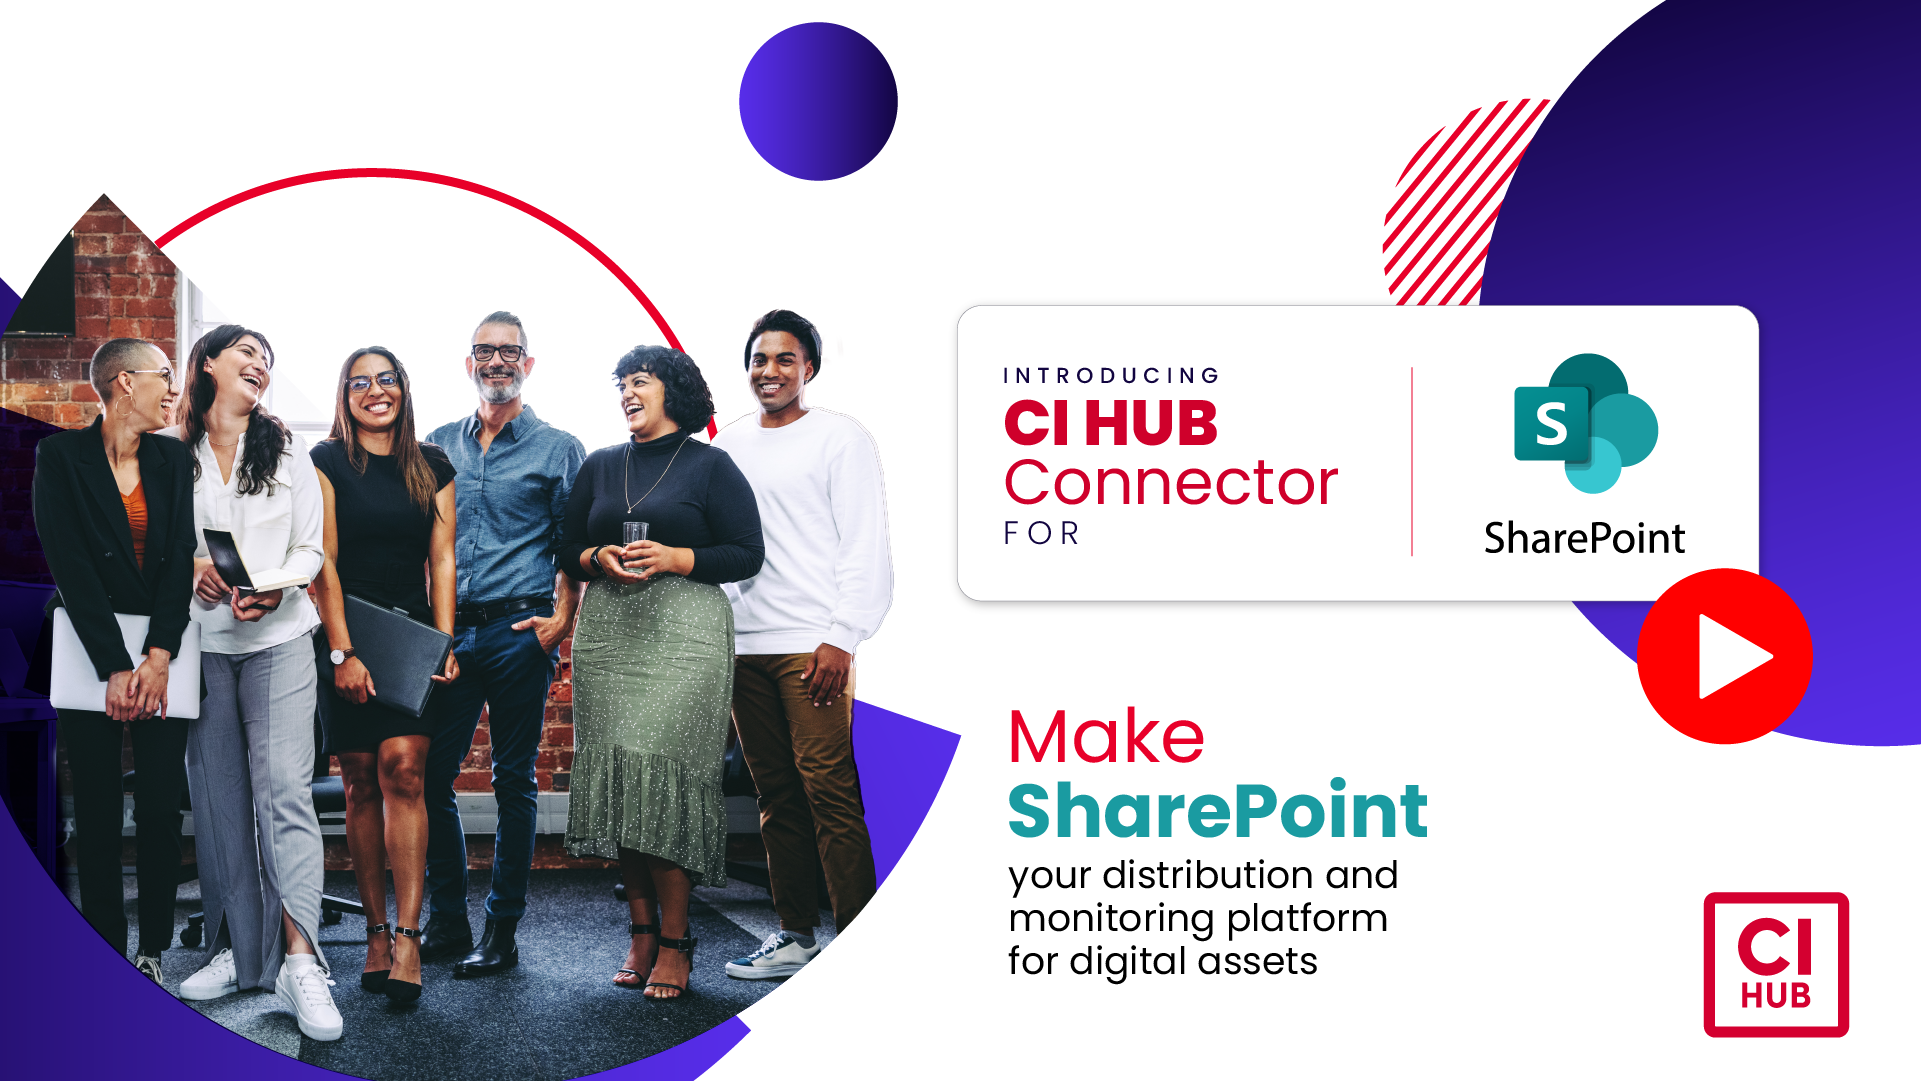 Introducing CI HUB Connector for SharePoint